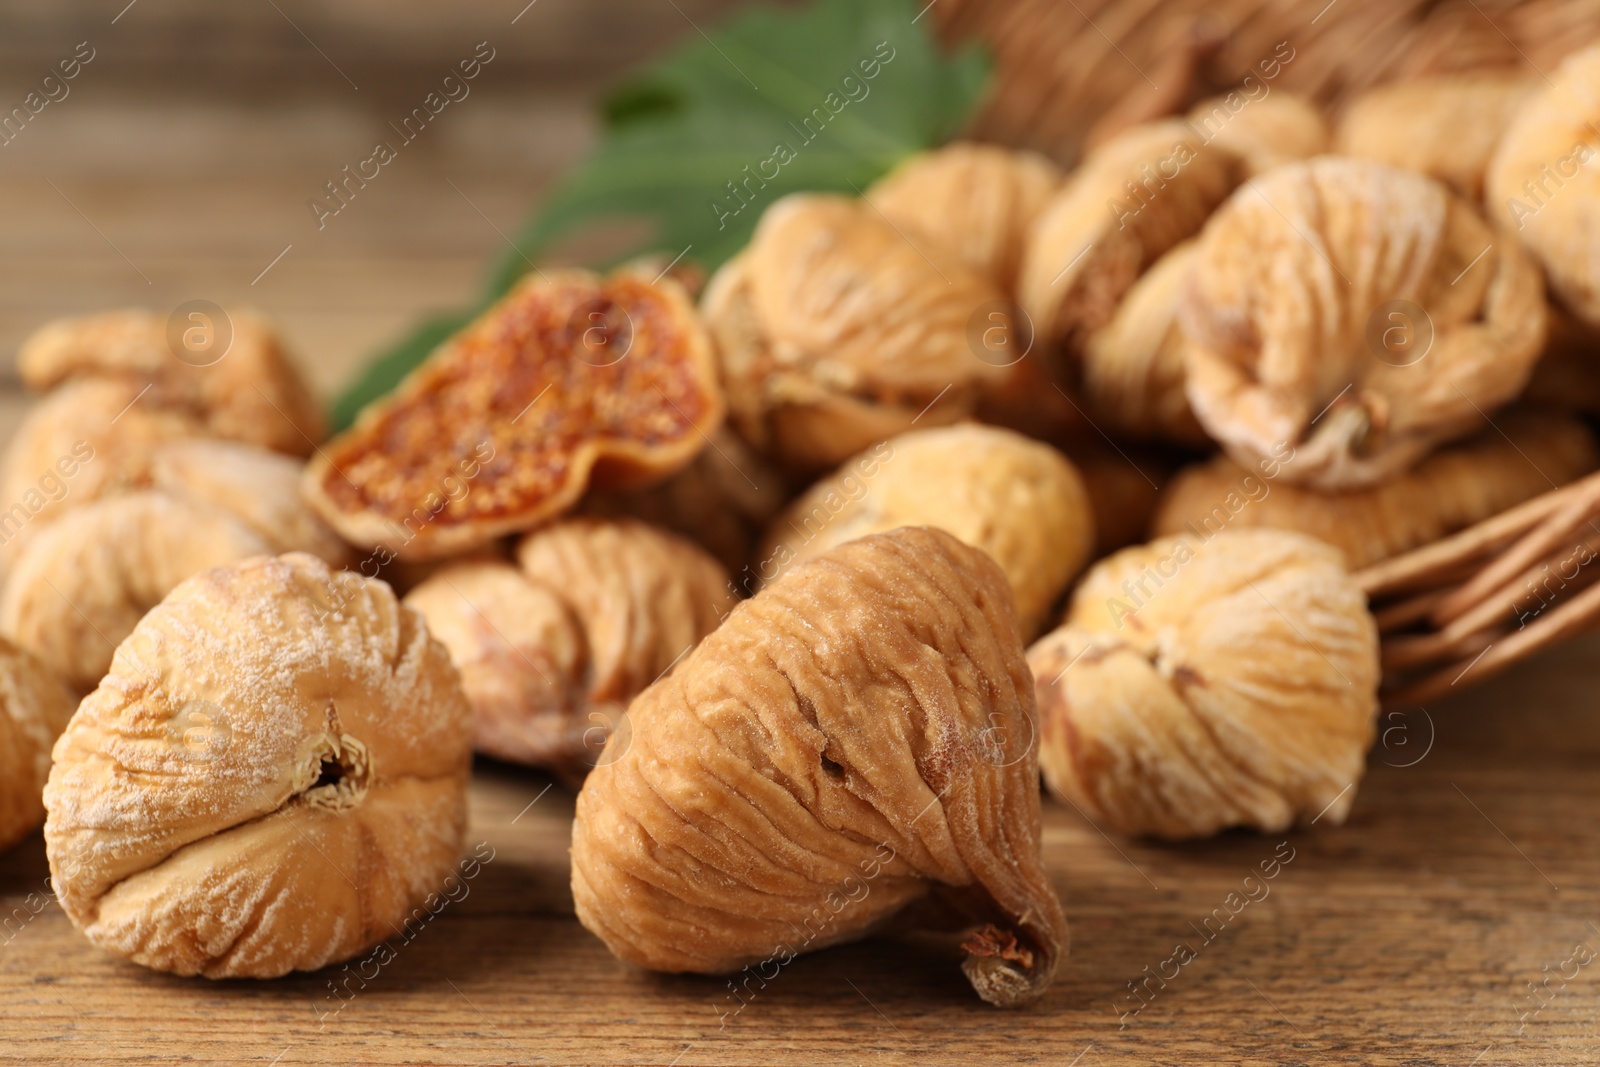 Photo of Overturned wicker basket and dried figs on wooden table, closeup